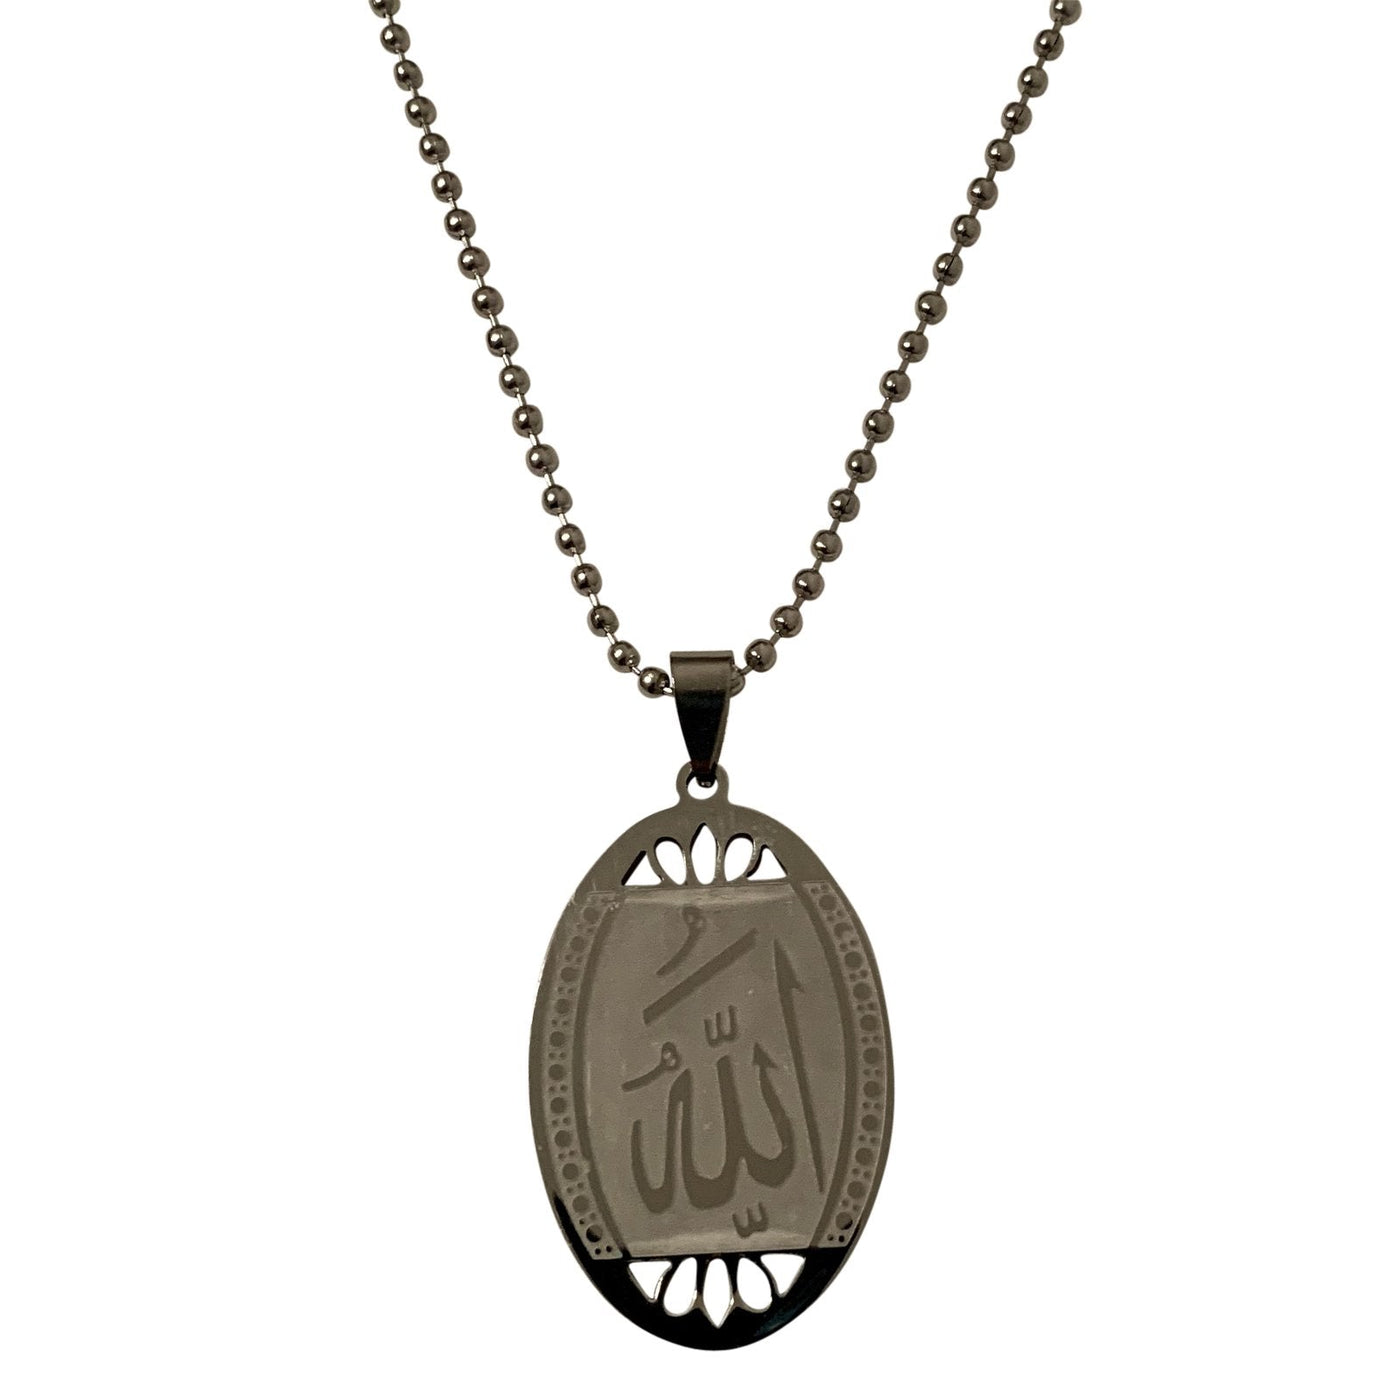 Allah Necklace Gold or Silver